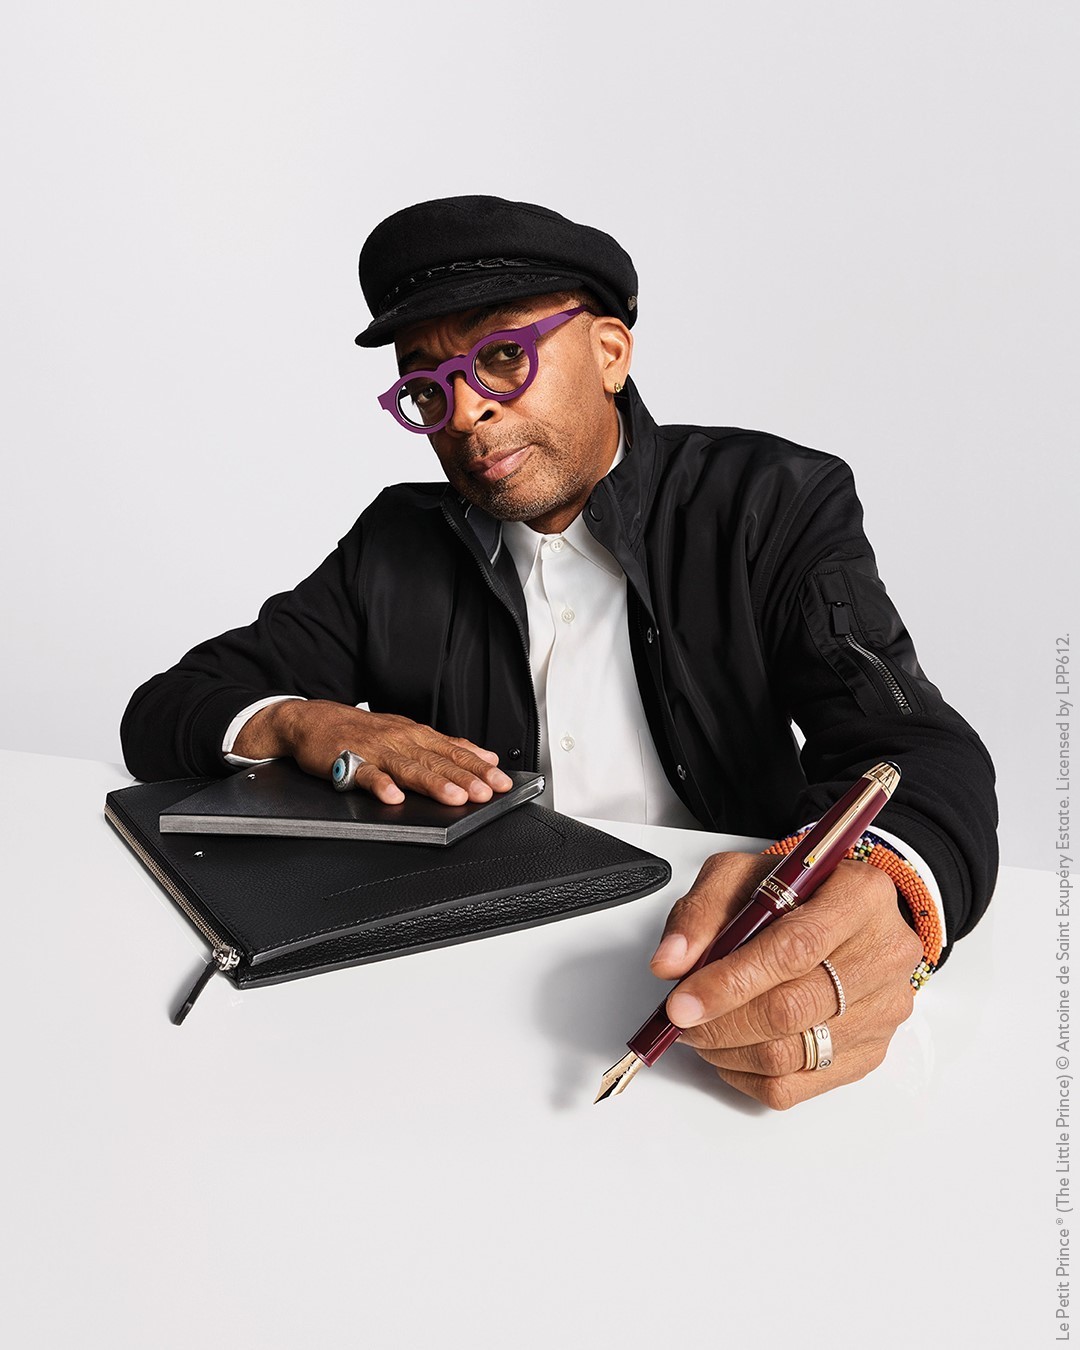 Montblanc - What Moves You, Makes You.
.
Authenticity and trust in yourself have allowed @officialspikelee to inscribe his mark into the history of film-making and activism. 34 years since his first m...